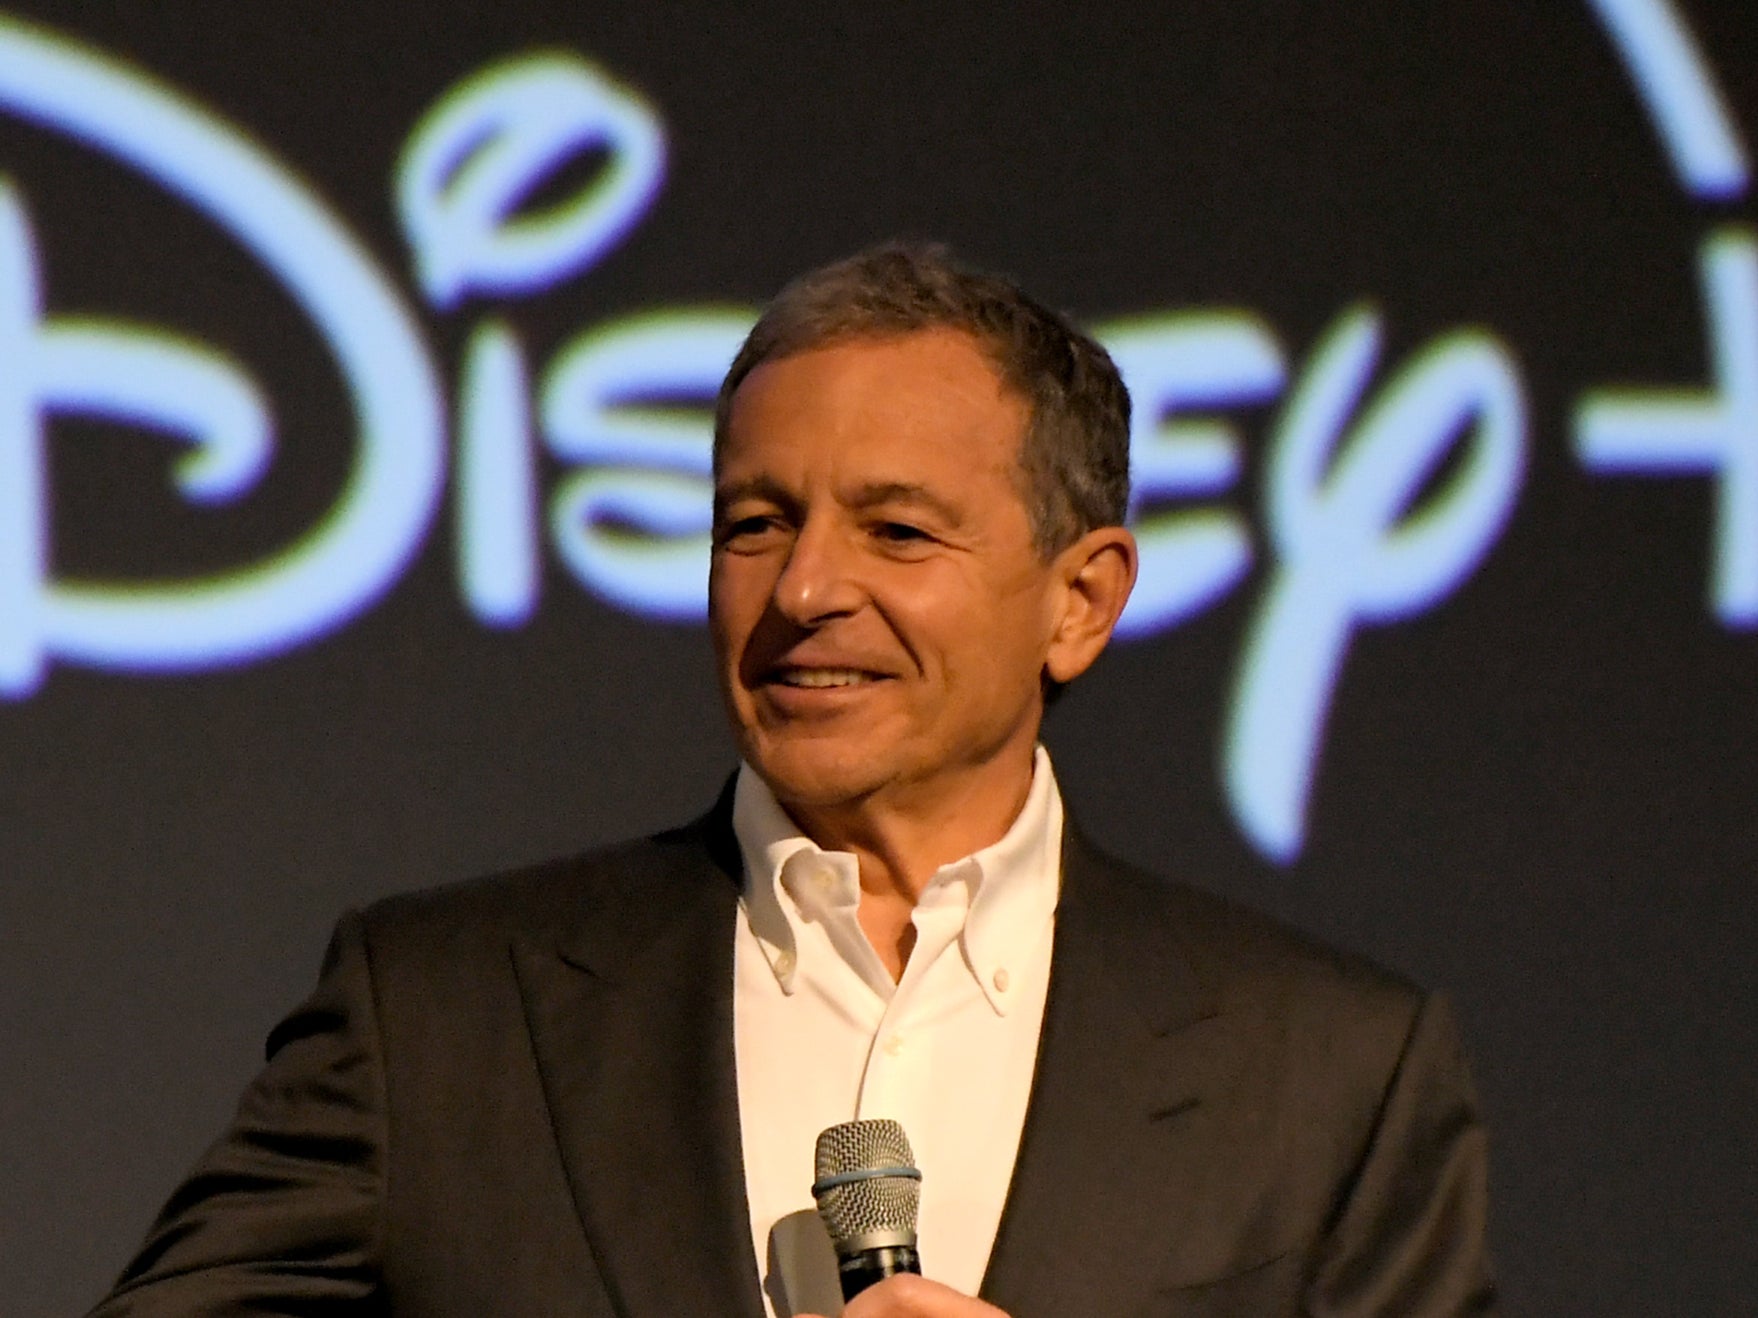 Bob Iger is back at the helm of the House of Mouse and keeping shareholders happy